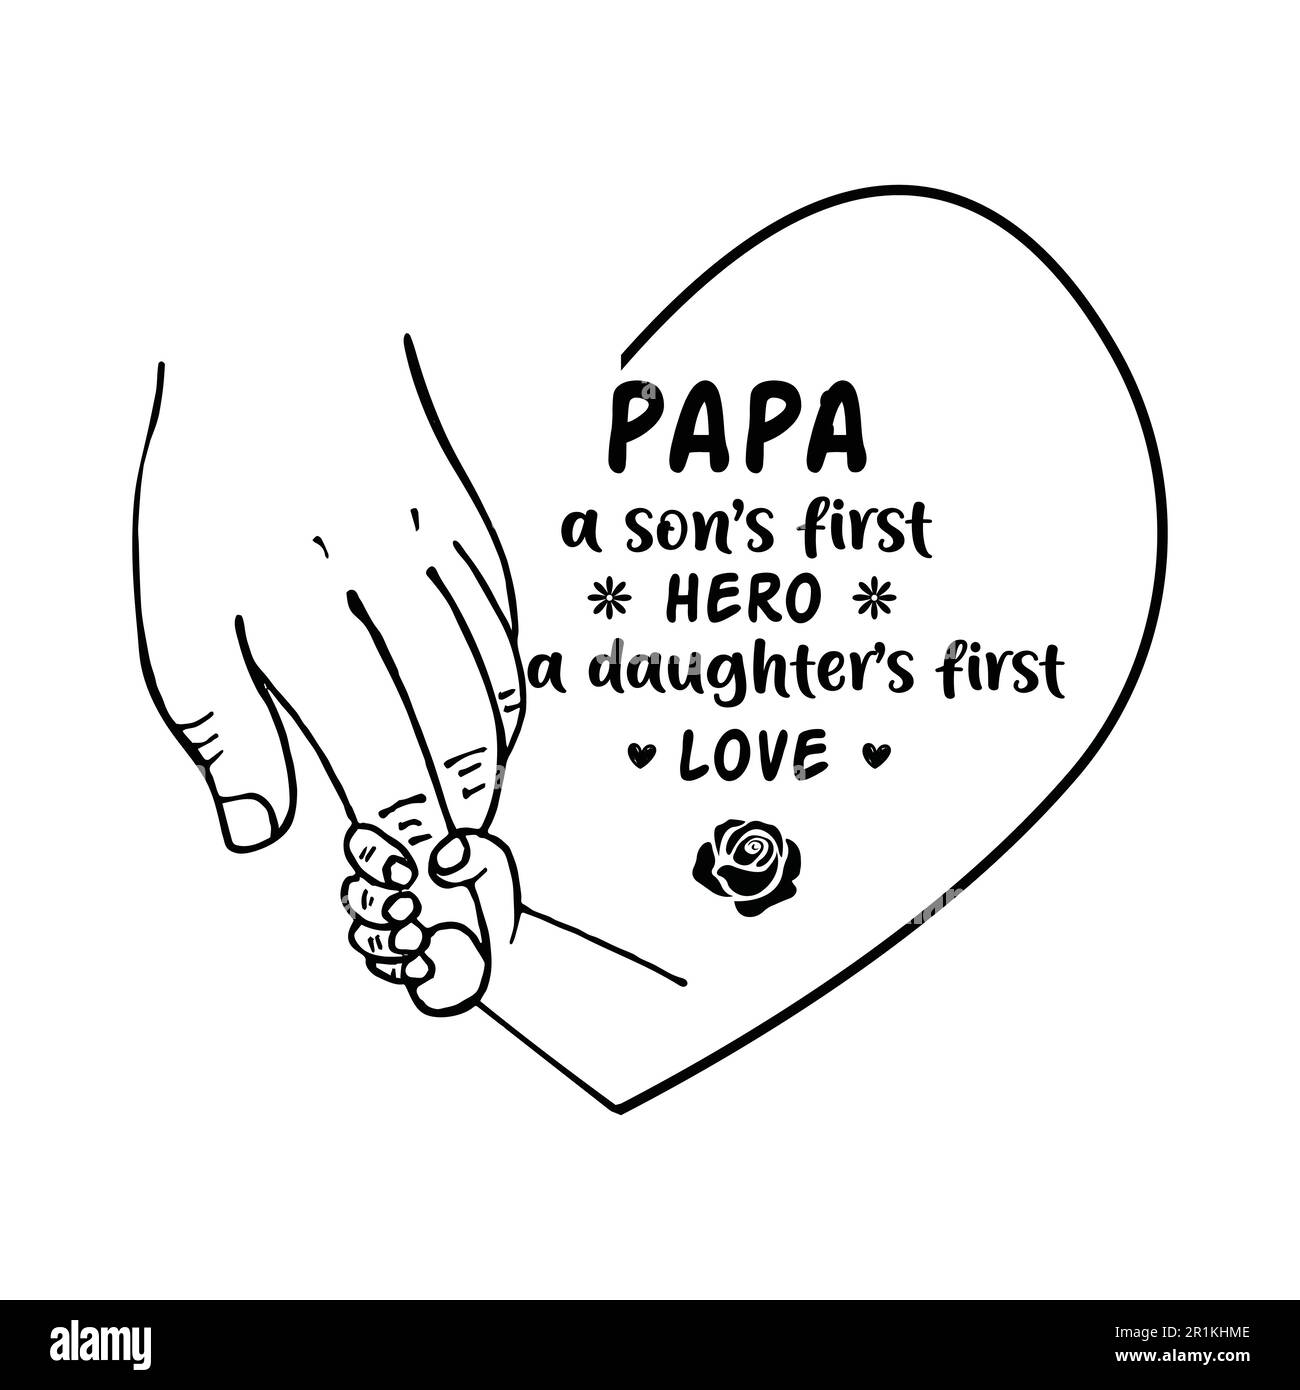 Papa a sons first hero a daughters first love t shirt design Stock Vector